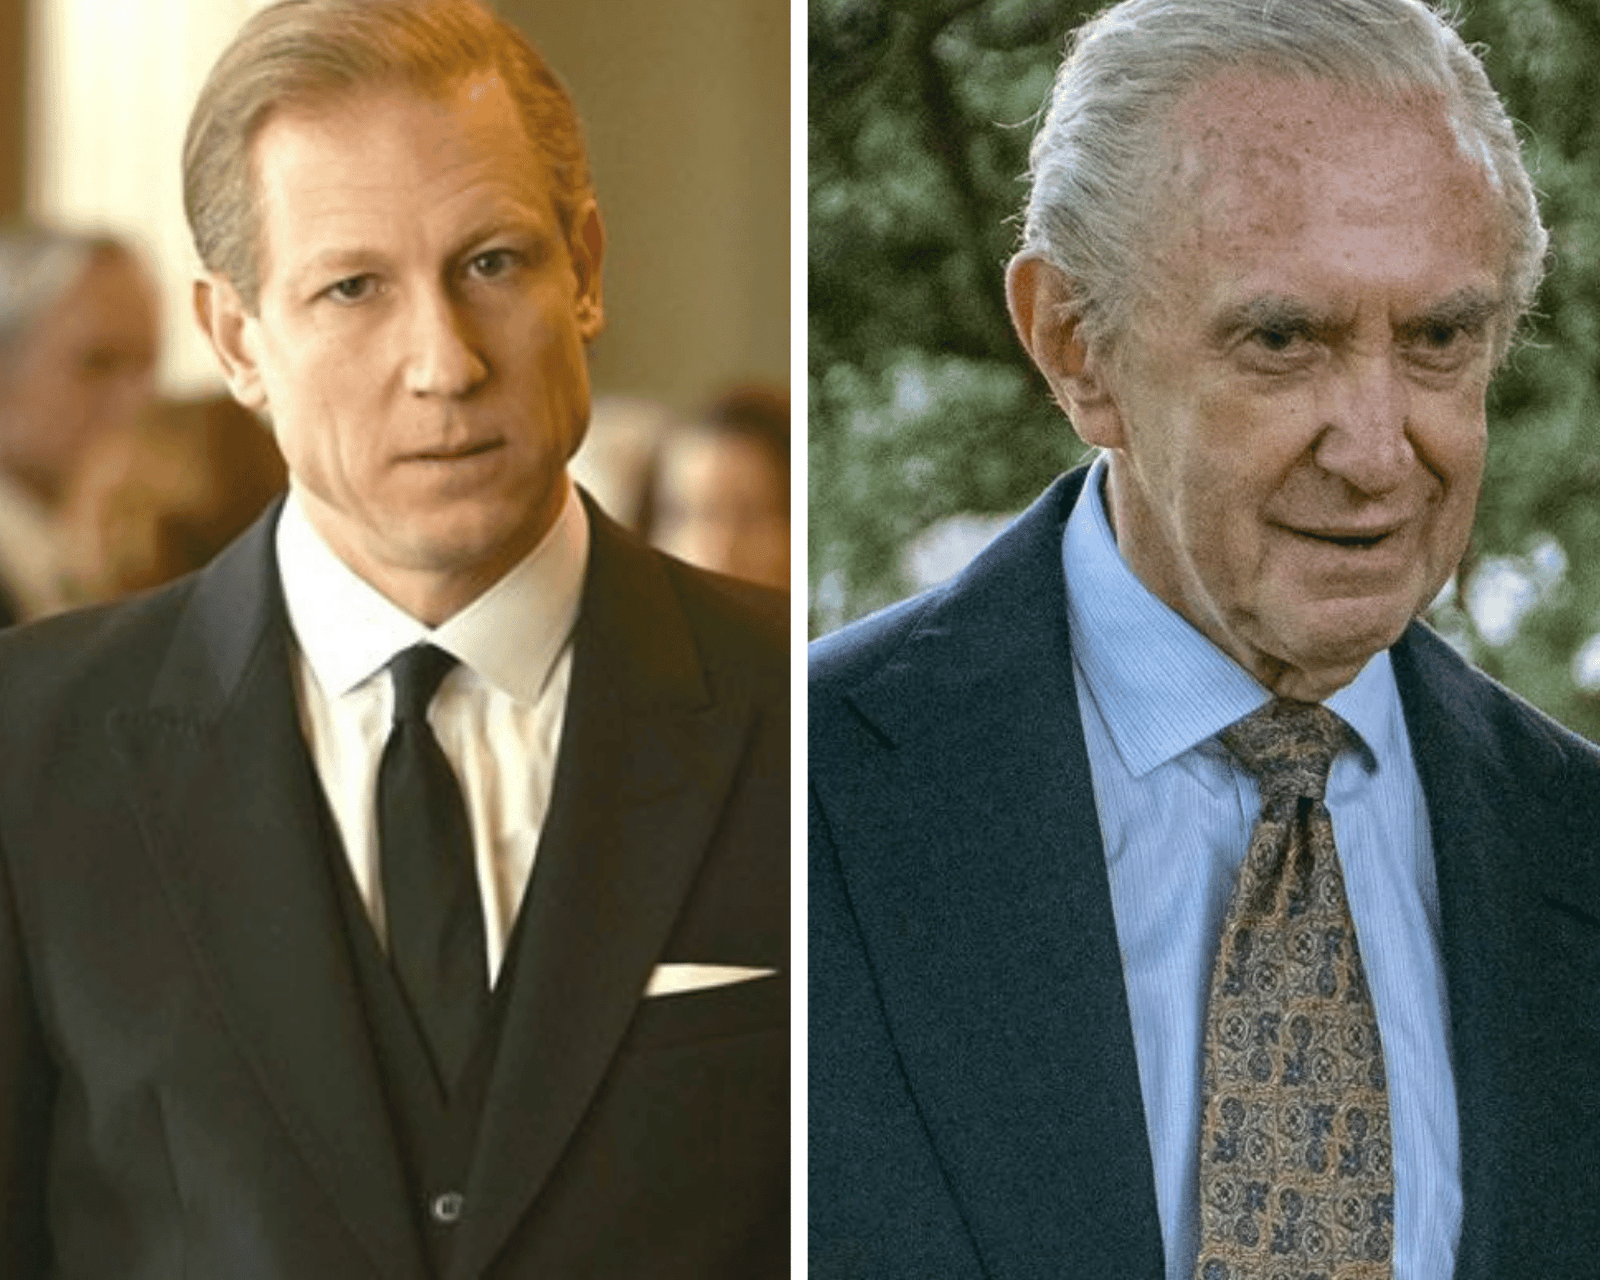 The Crown Season 5 Cast - Tobias Menzies and Jonathan Pryce as Prince Philip